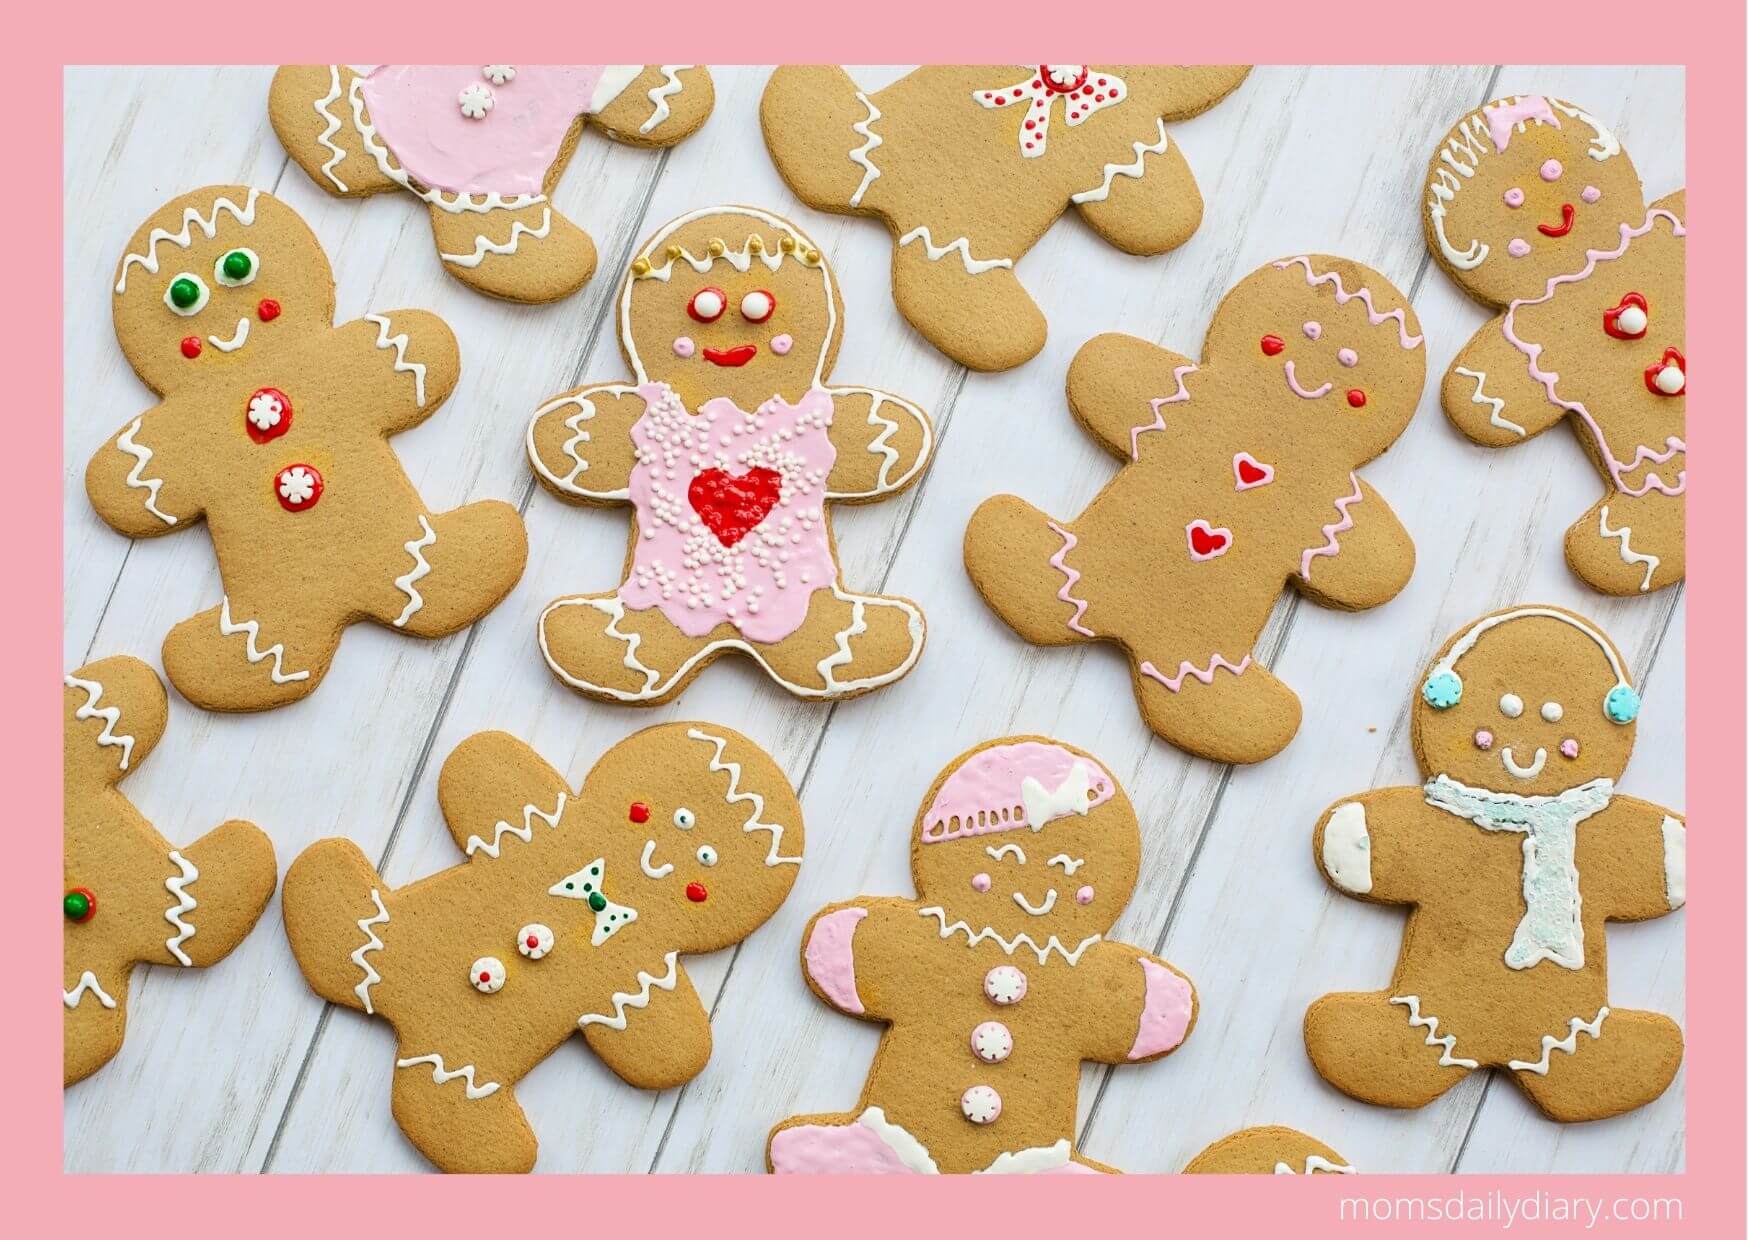 Christmas activities for toddlers: Baking cookies